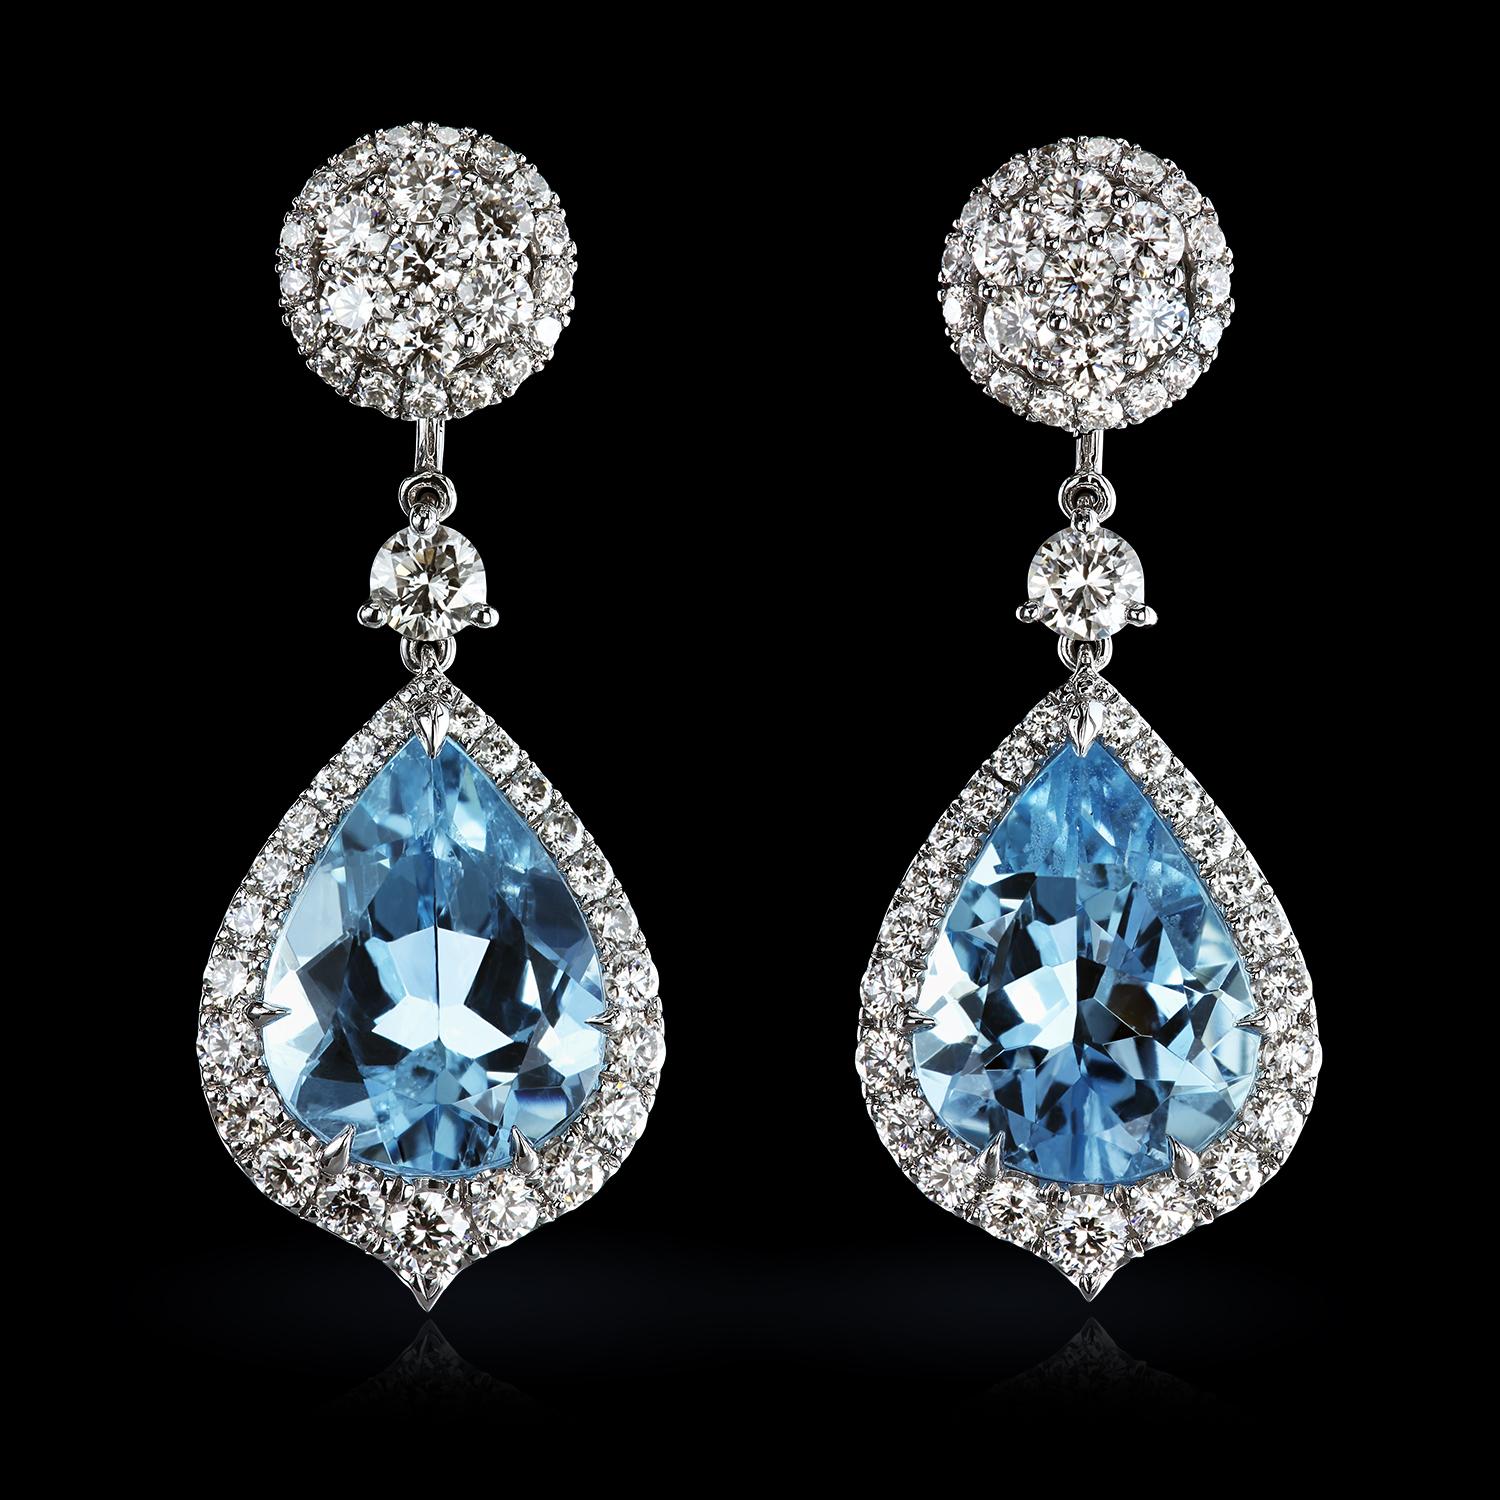 Gorgeous chandeliers are specifically designed to make you look like an absolute goddess on your wedding day and later convert to a casual pair of everyday studs. The drops have a total of 7.75-carats of aquamarines and 2.23 carats of F/VS diamonds.